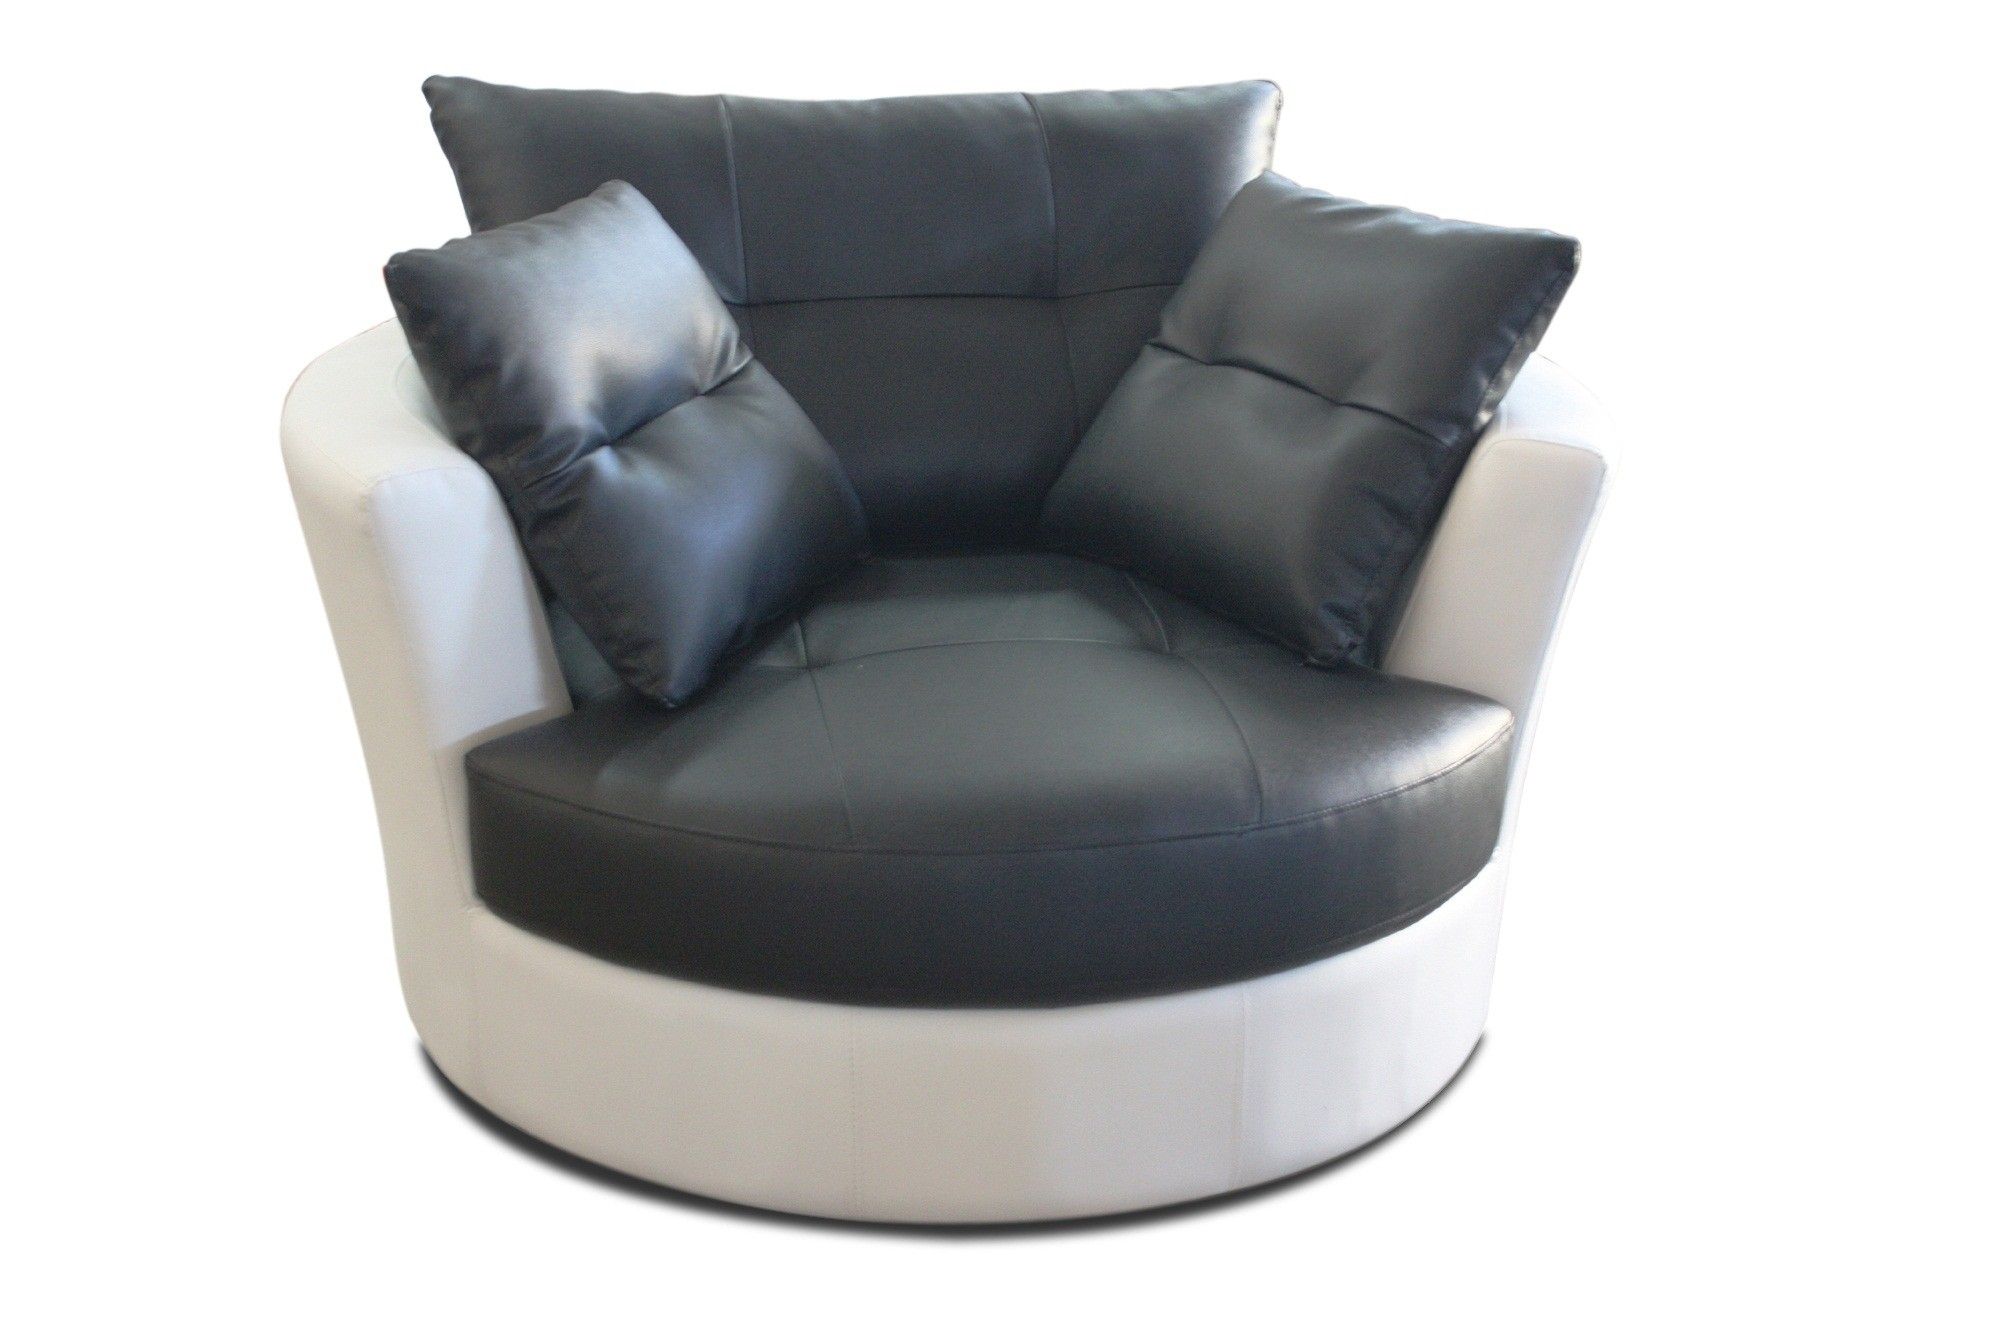 Black Couch Ottoman Reupholster Sofa Designs Clipgoo Contemporary Within Leather Black Swivel Chairs (View 18 of 25)